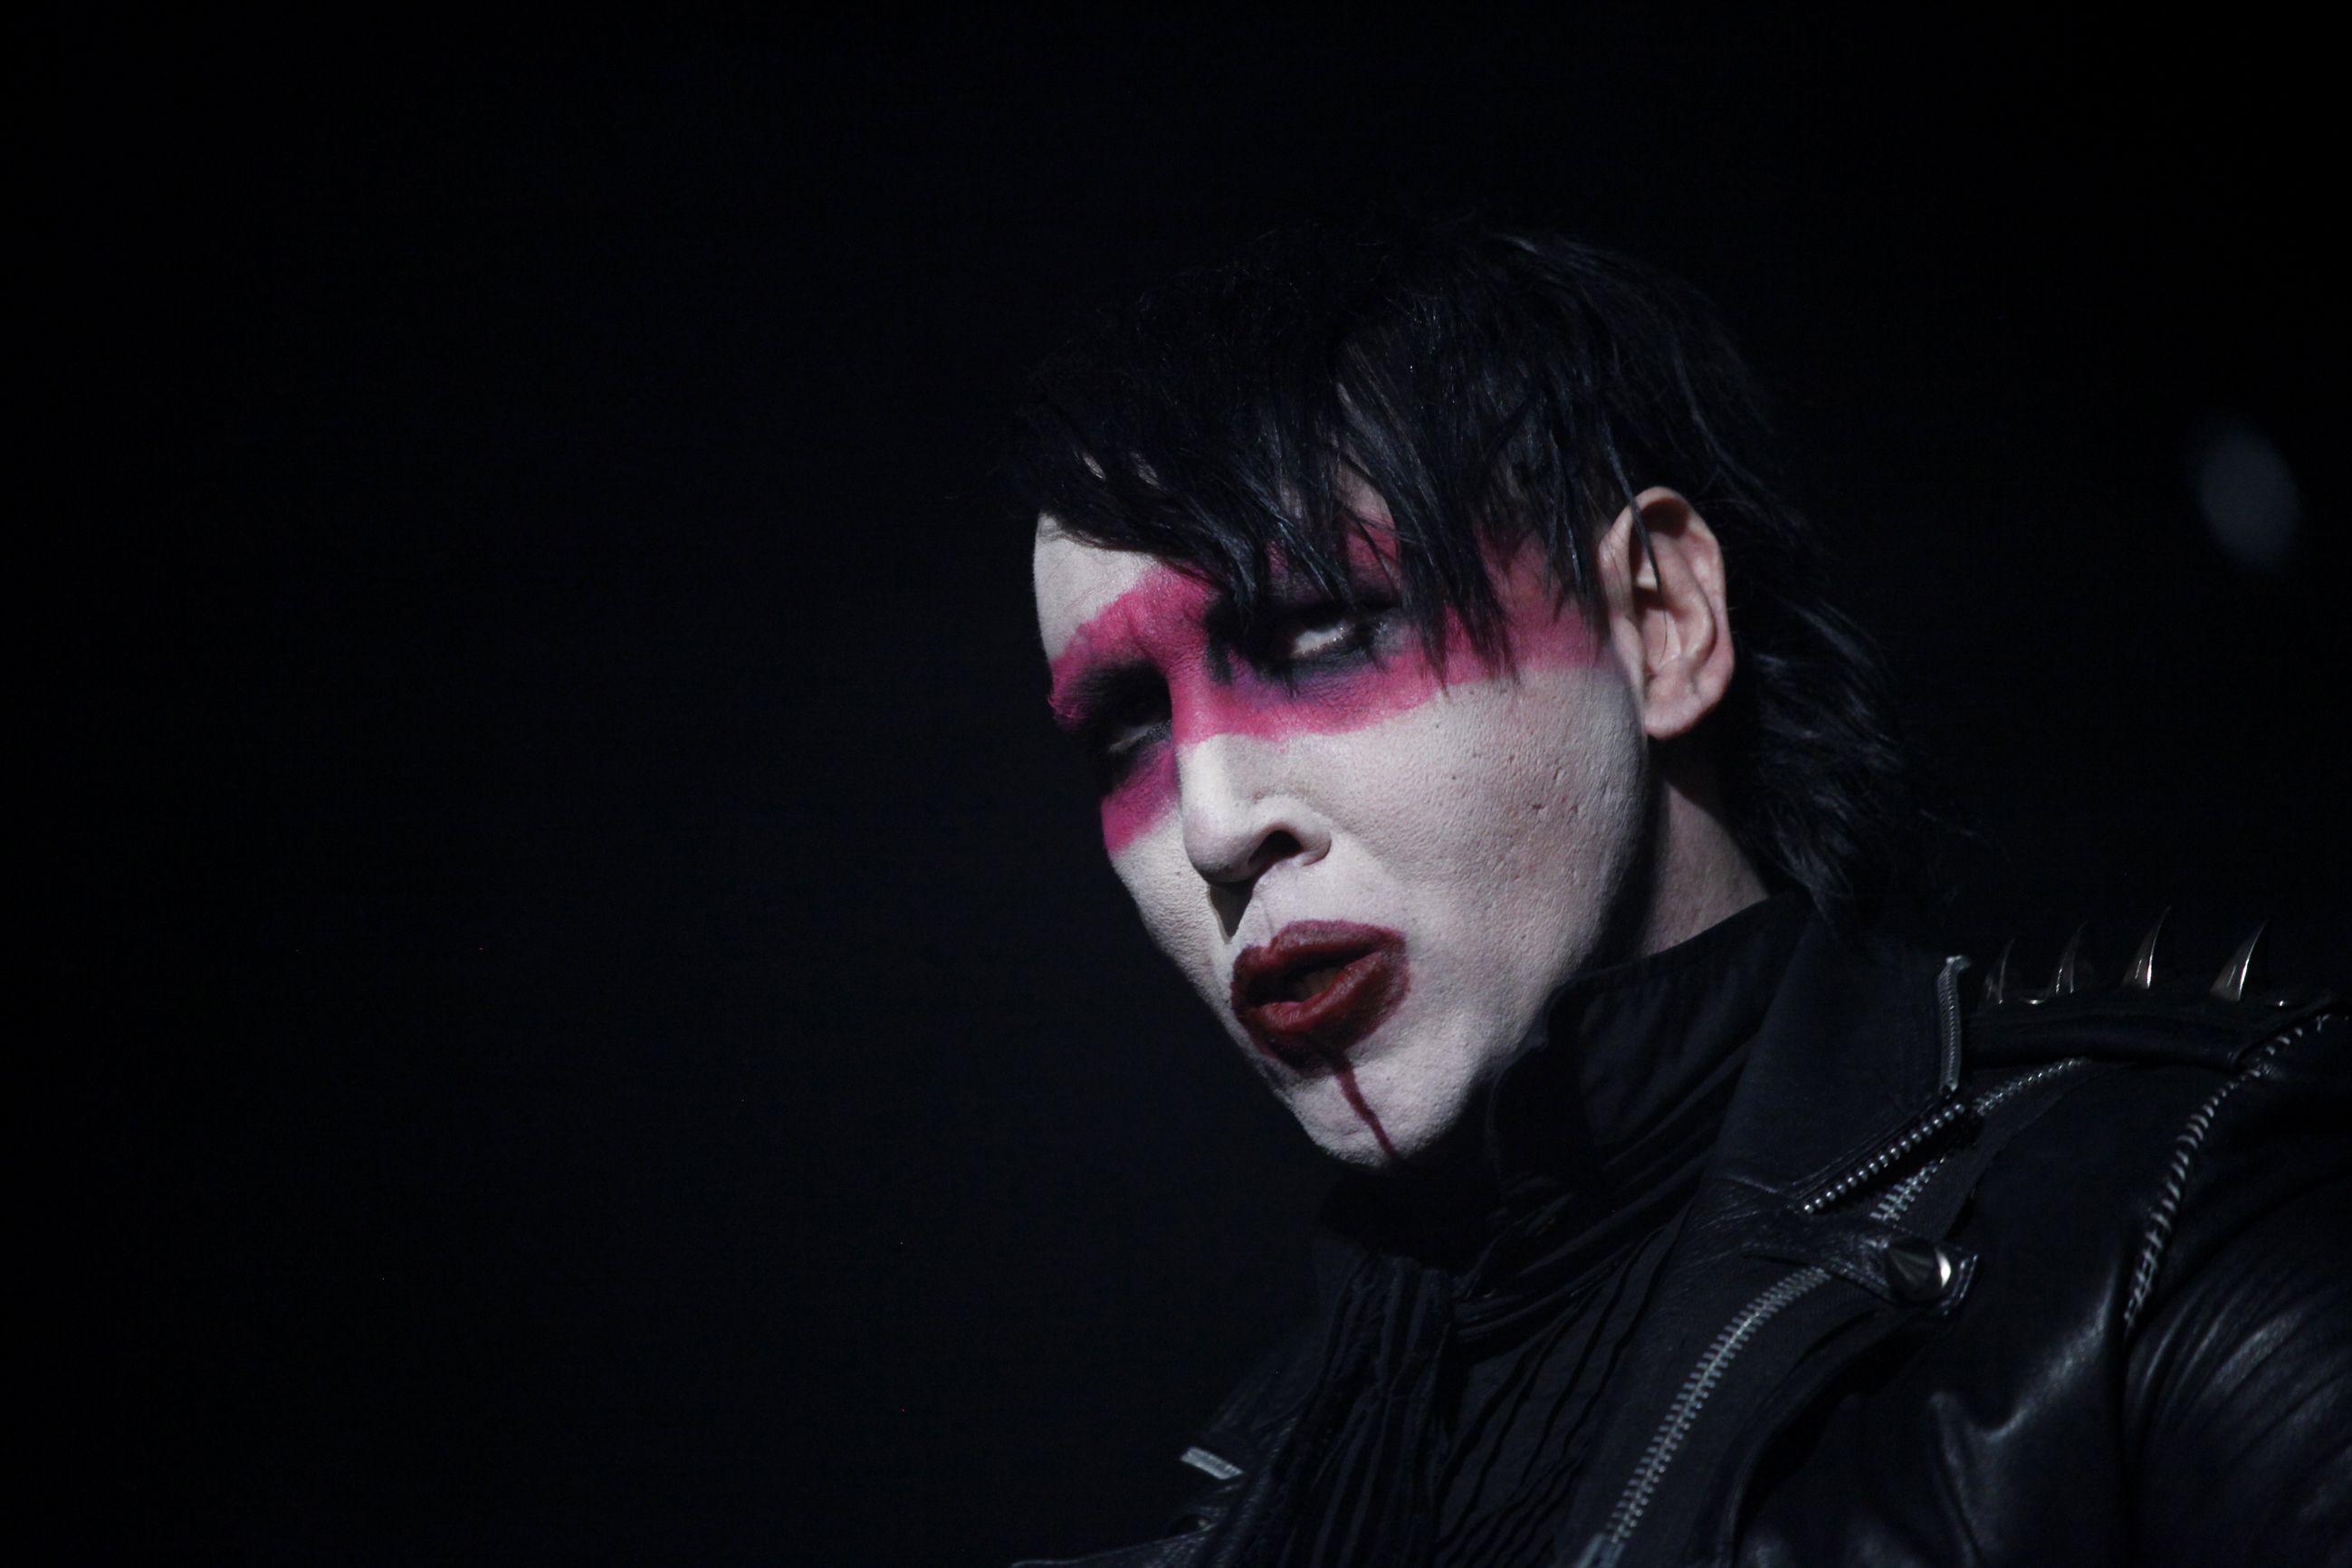 Hard rock singer Marilyn Manson wallpapers and images - wallpapers